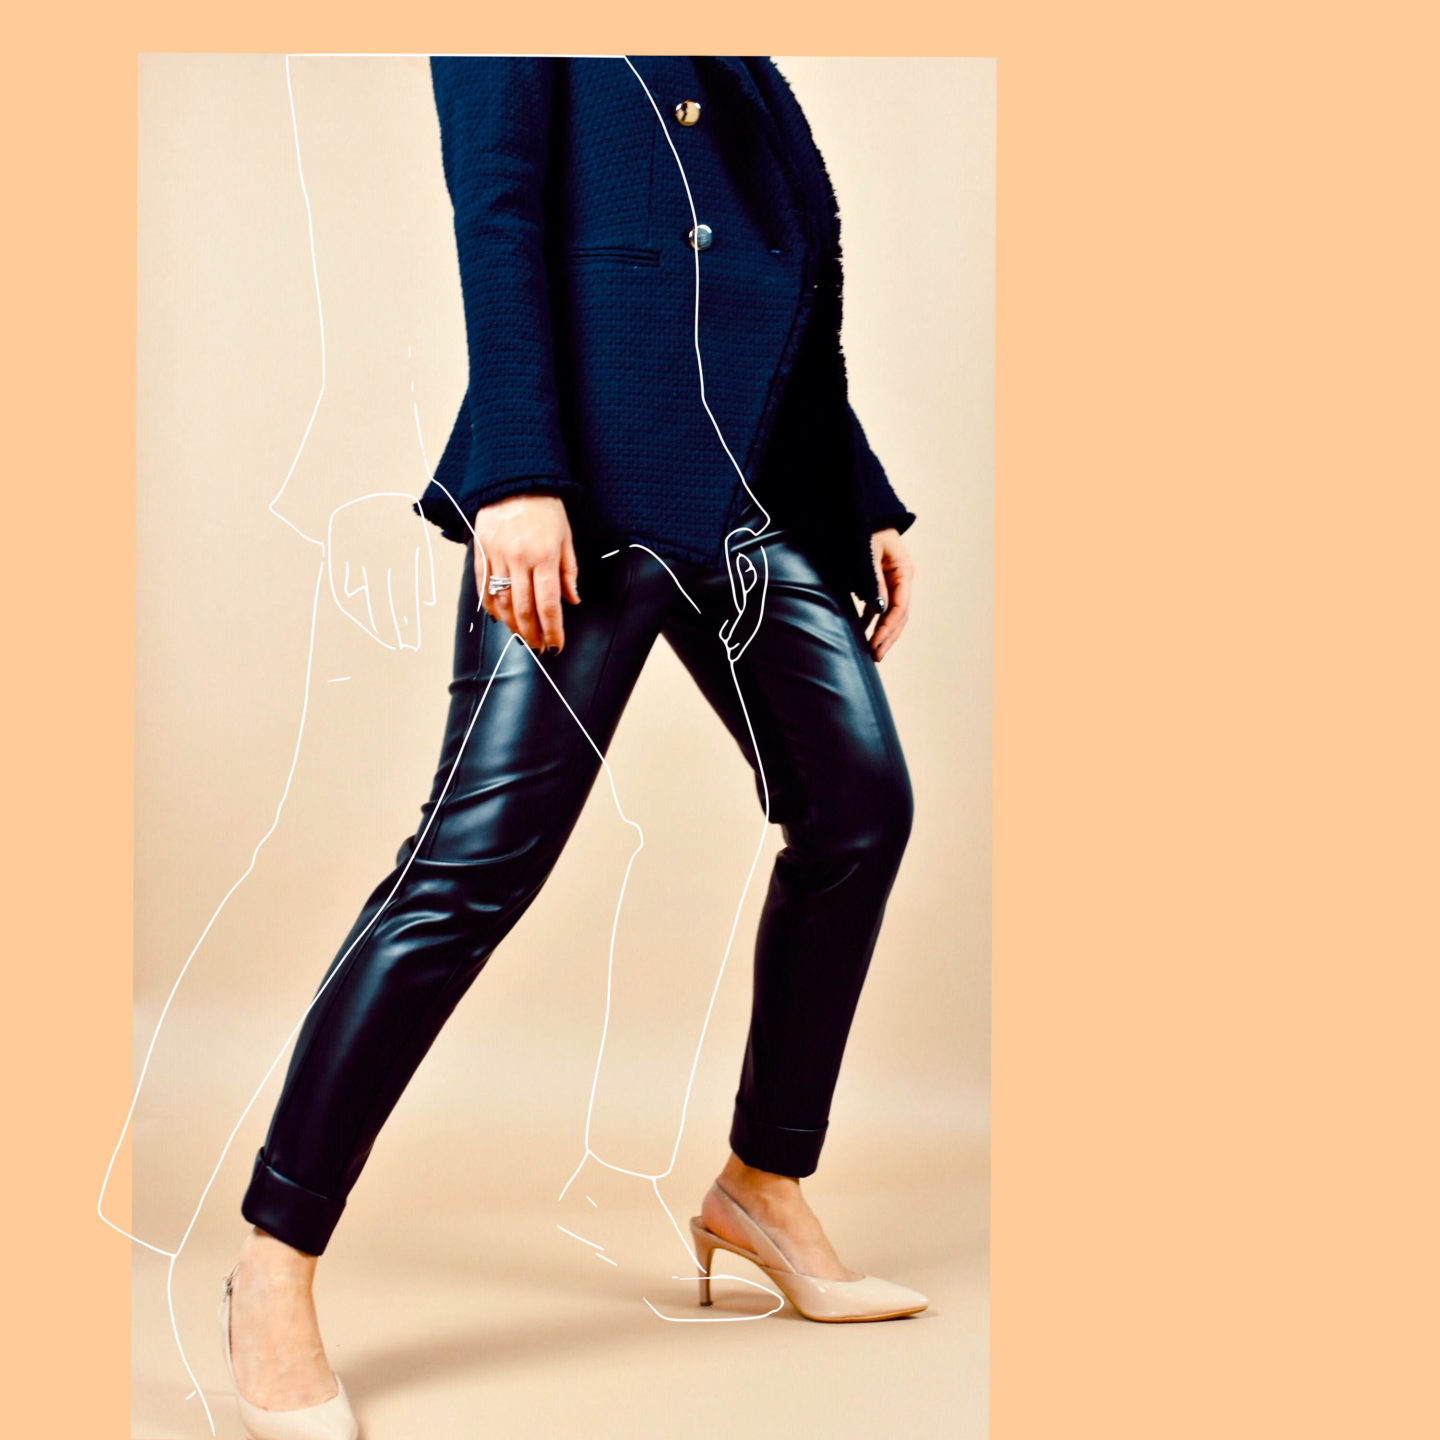  ann-taylor-leather-pants-spring-2020-collection-influencer-vanessa-lambert-whatwouldvwear